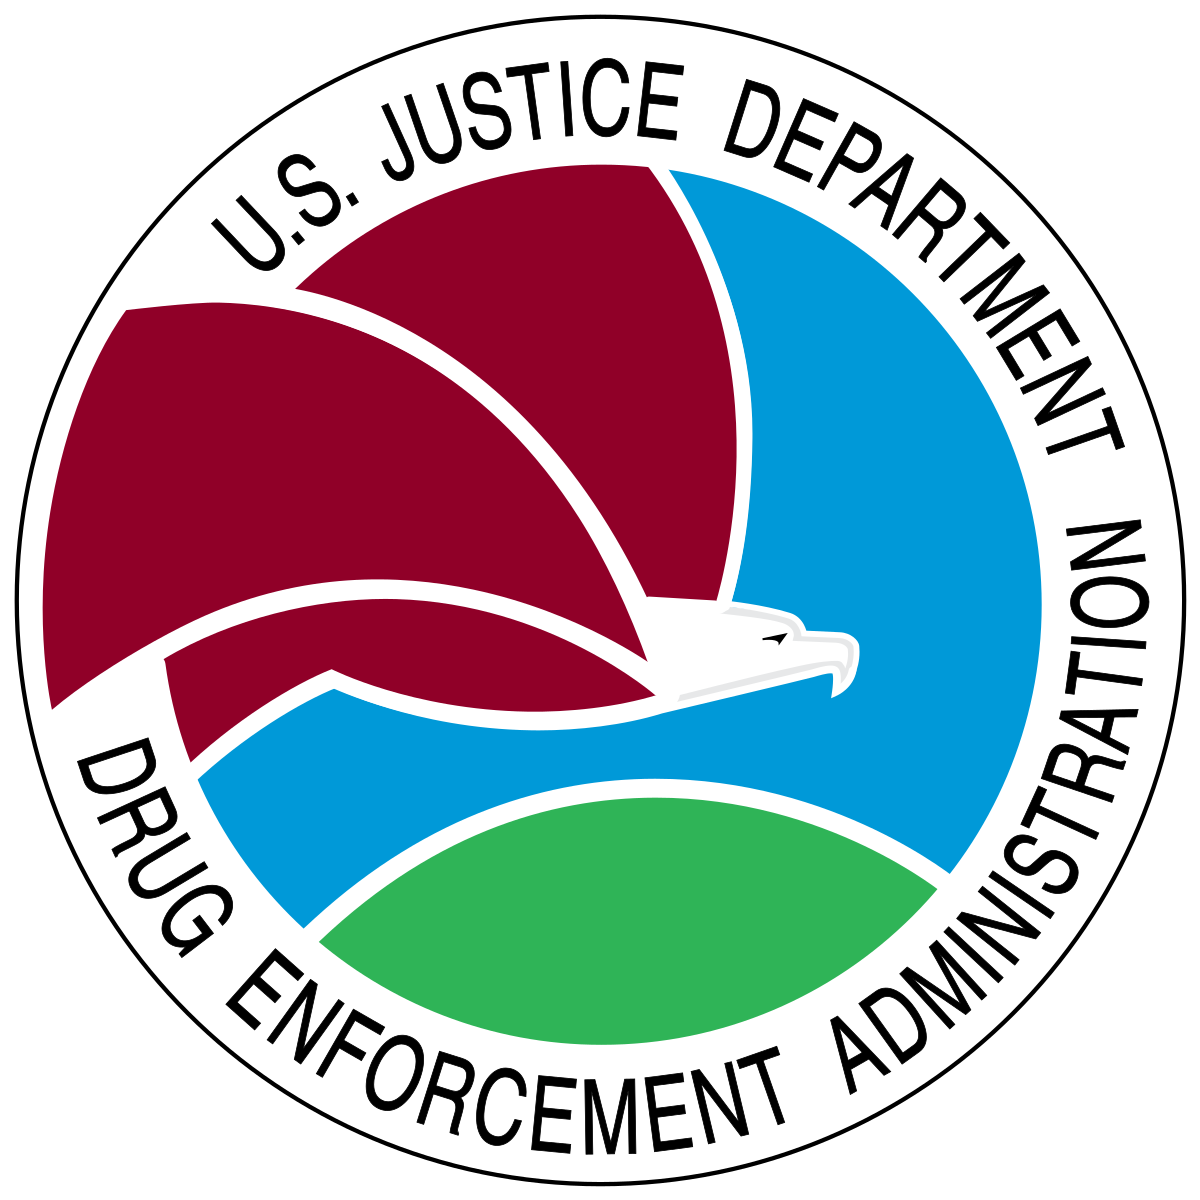 DEA RESPONDS TO FED COURT ORDER, ANNOUNCES STEPS TO IMPROVE CANNABIS RESEARCH ACCESS